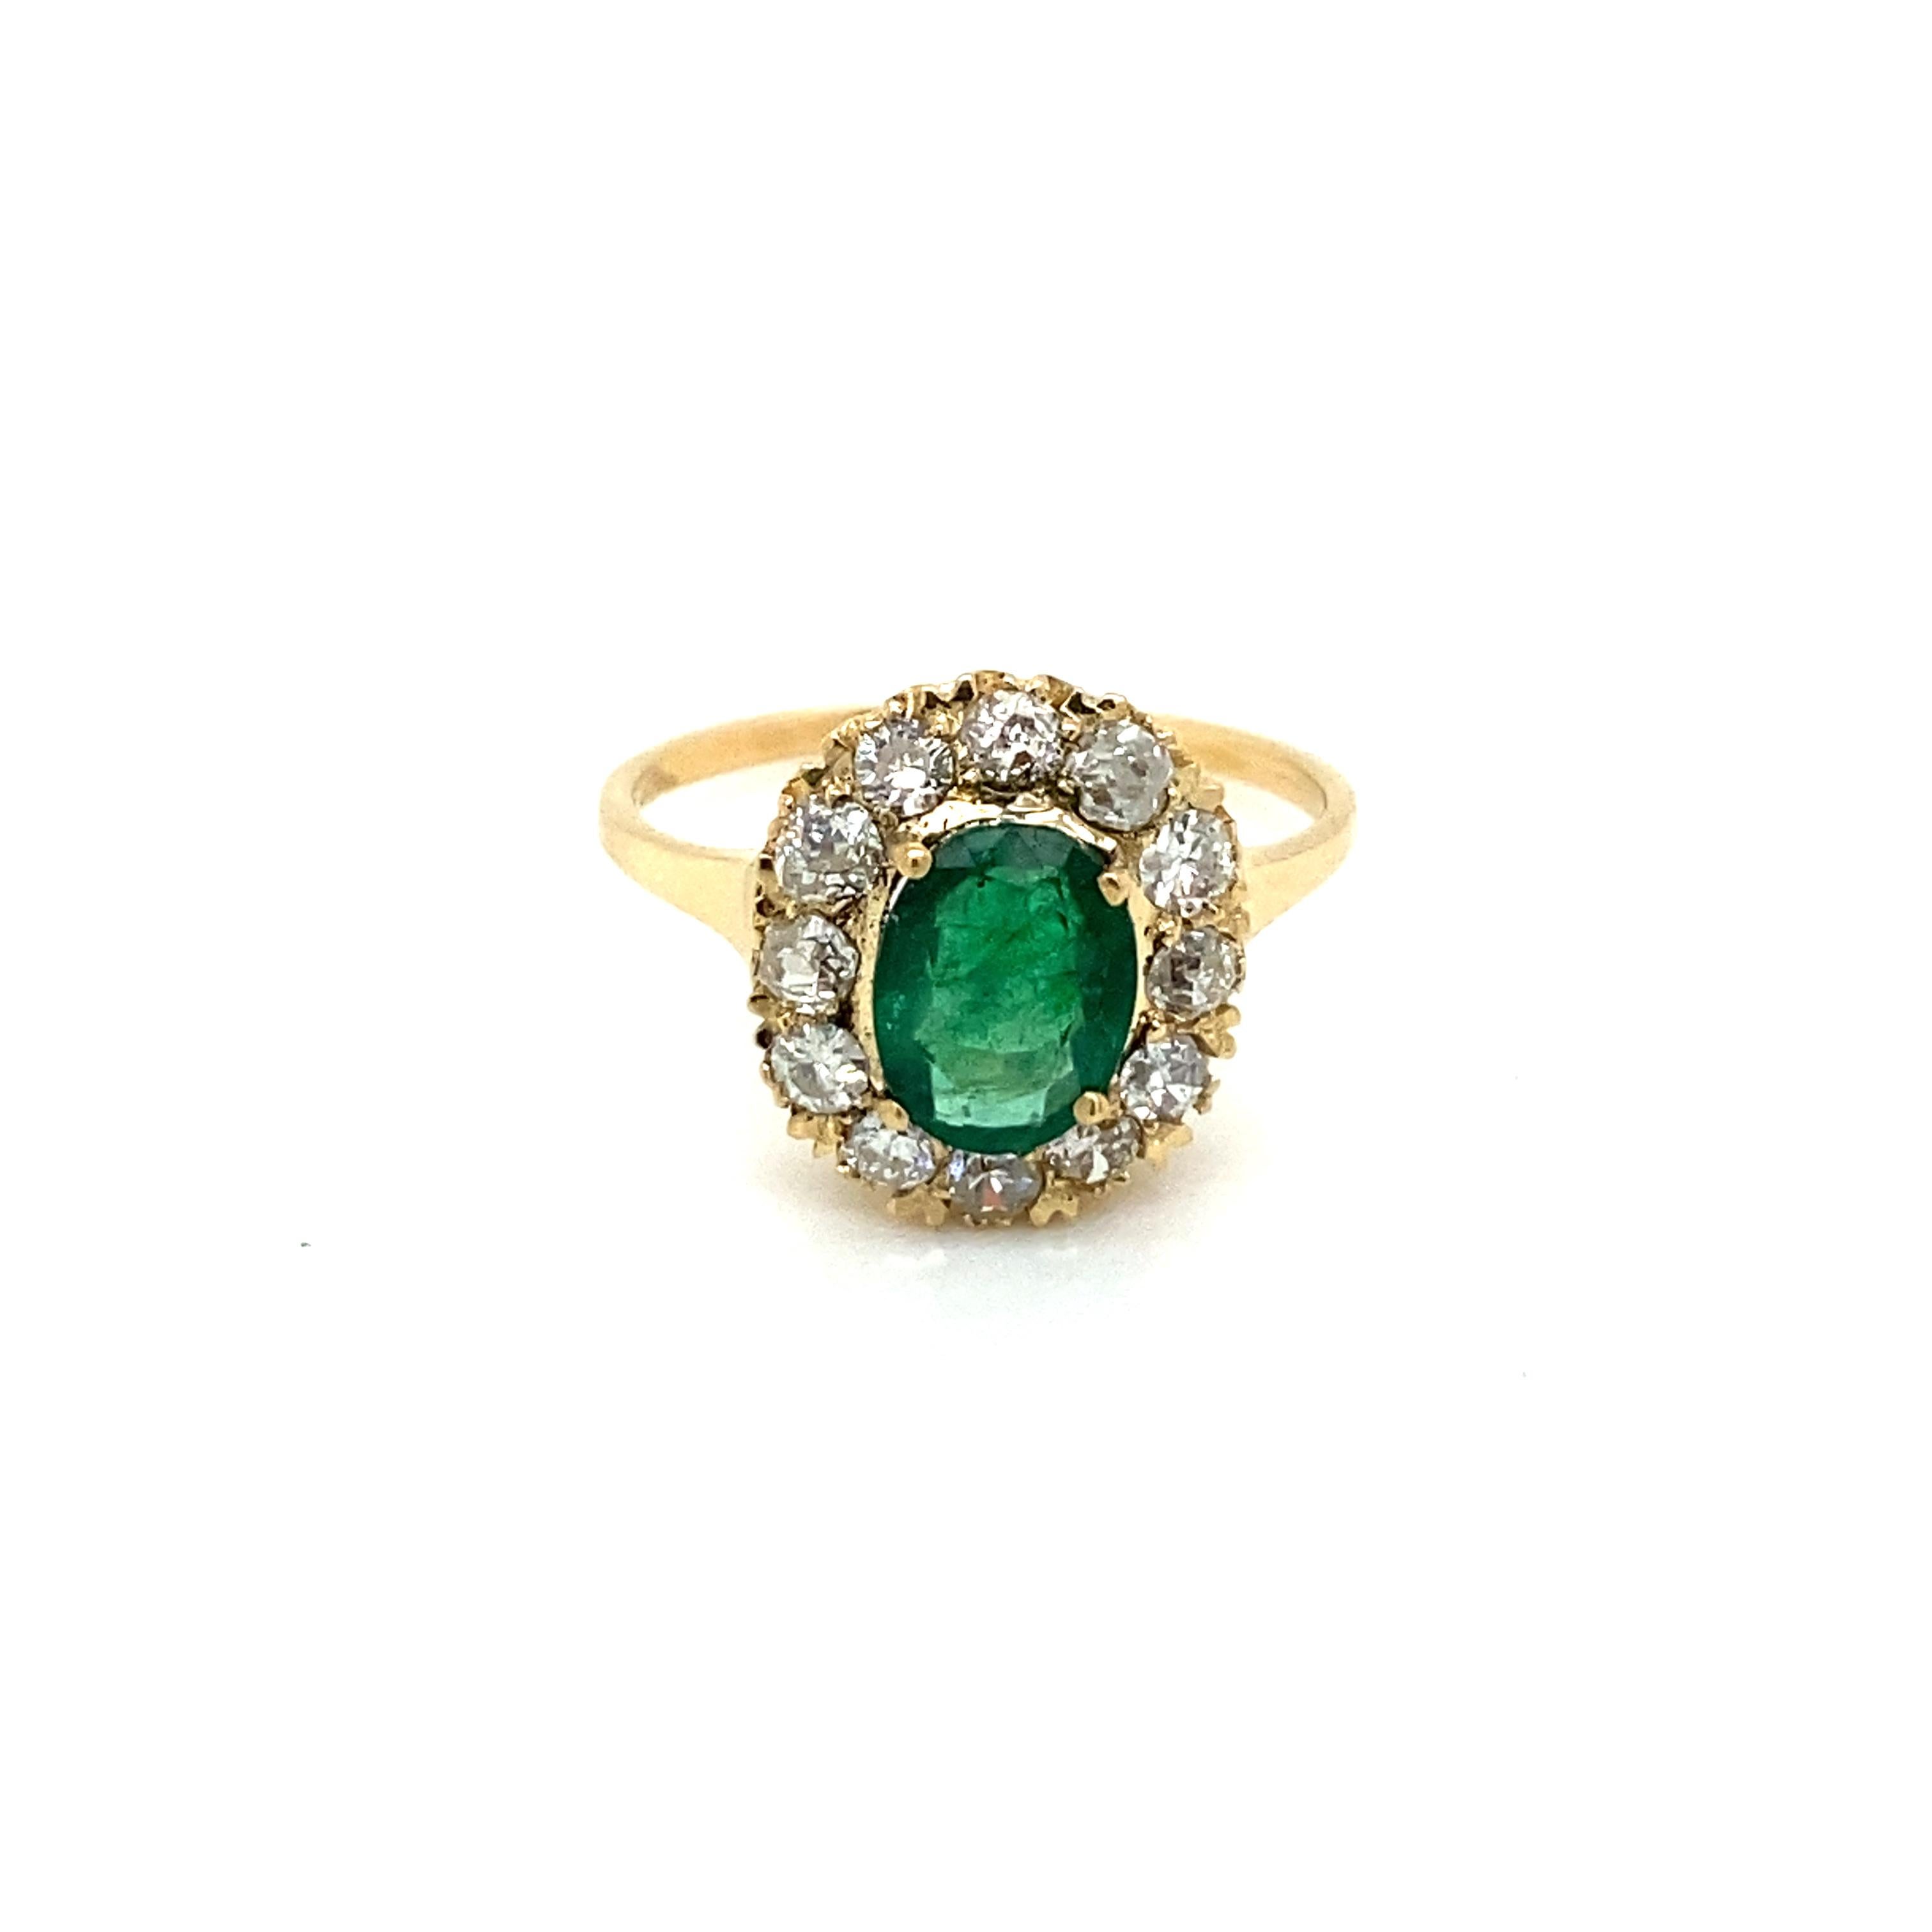 Beautiful 18k yellow gold cluster ring. It features in the center one vivid Natural Emerald oval shape, origin Zambia, weight 1.30 ct., surrounded by Sparkling Old mine cut diamond weighing .70 ct. all together, graded I color Vs2.  
Circa